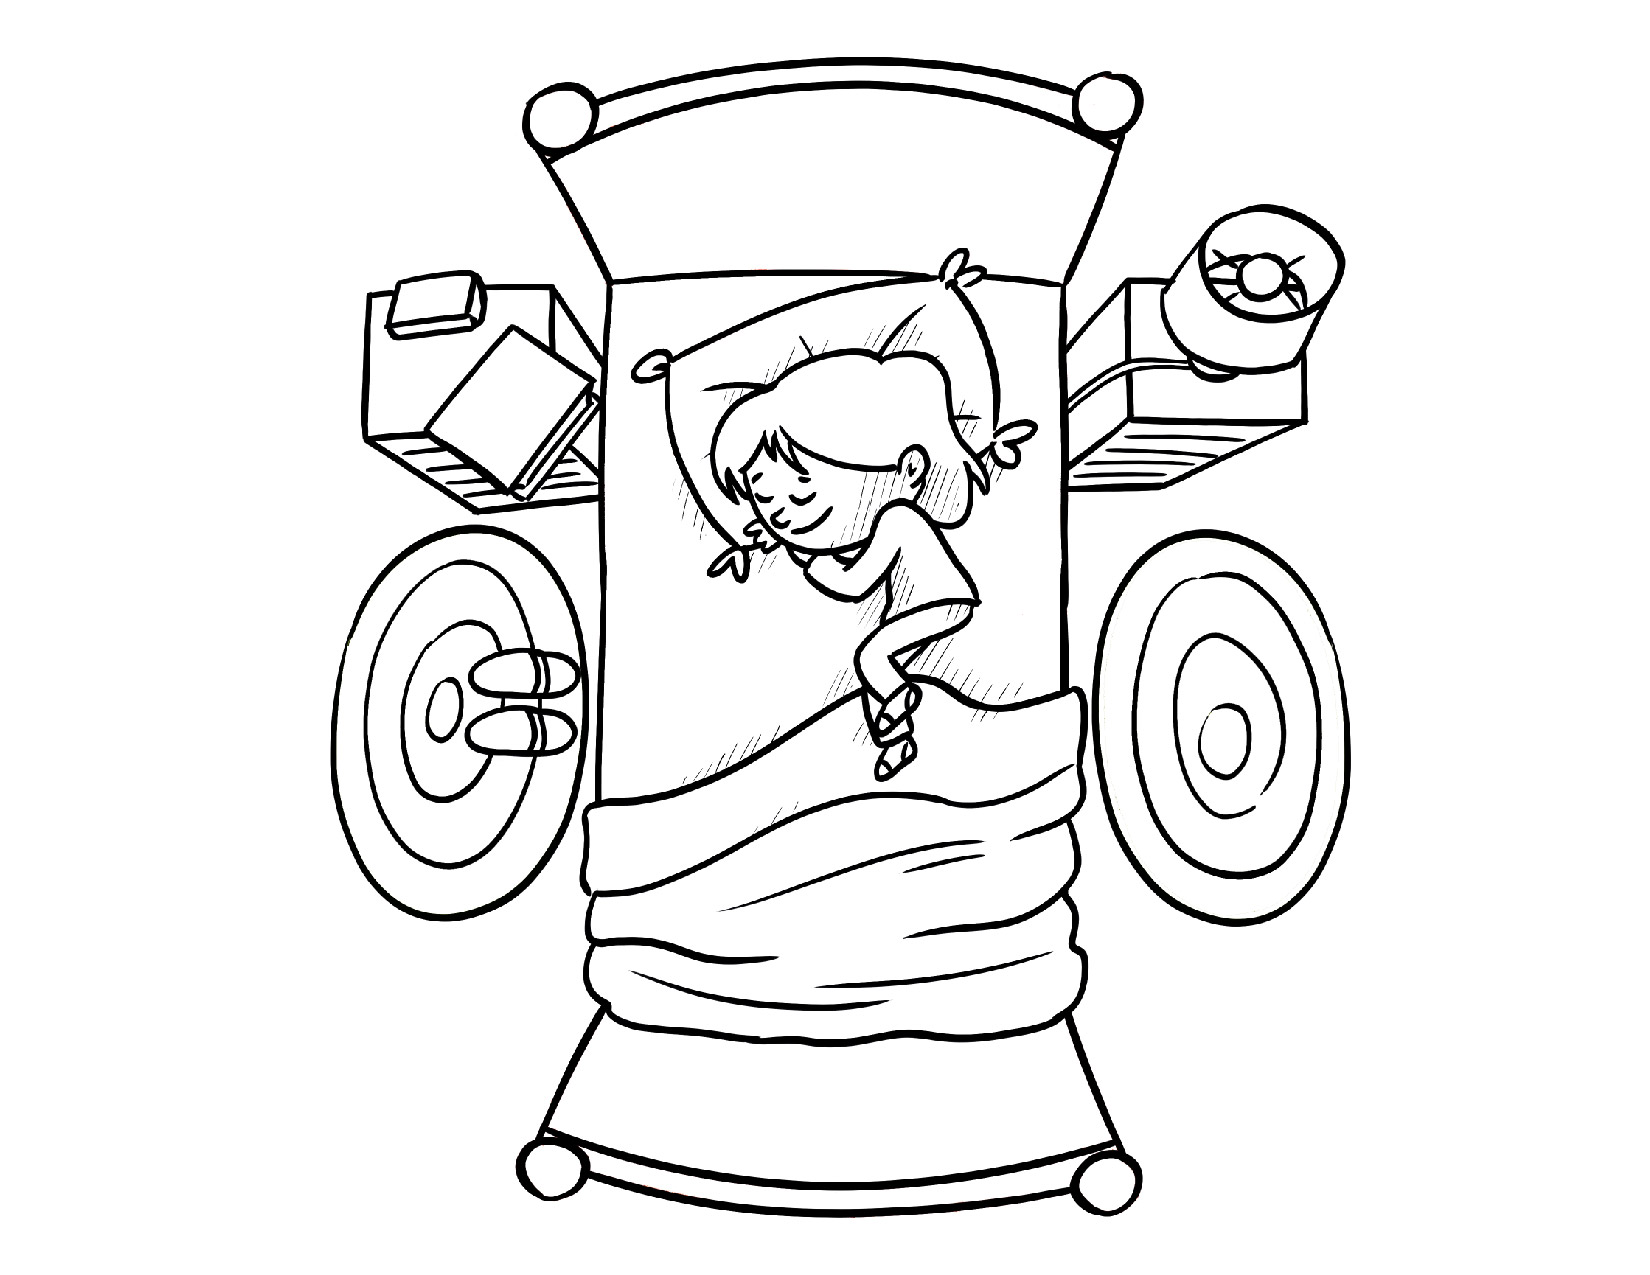 Coloring page of a little girl sleeping in bed